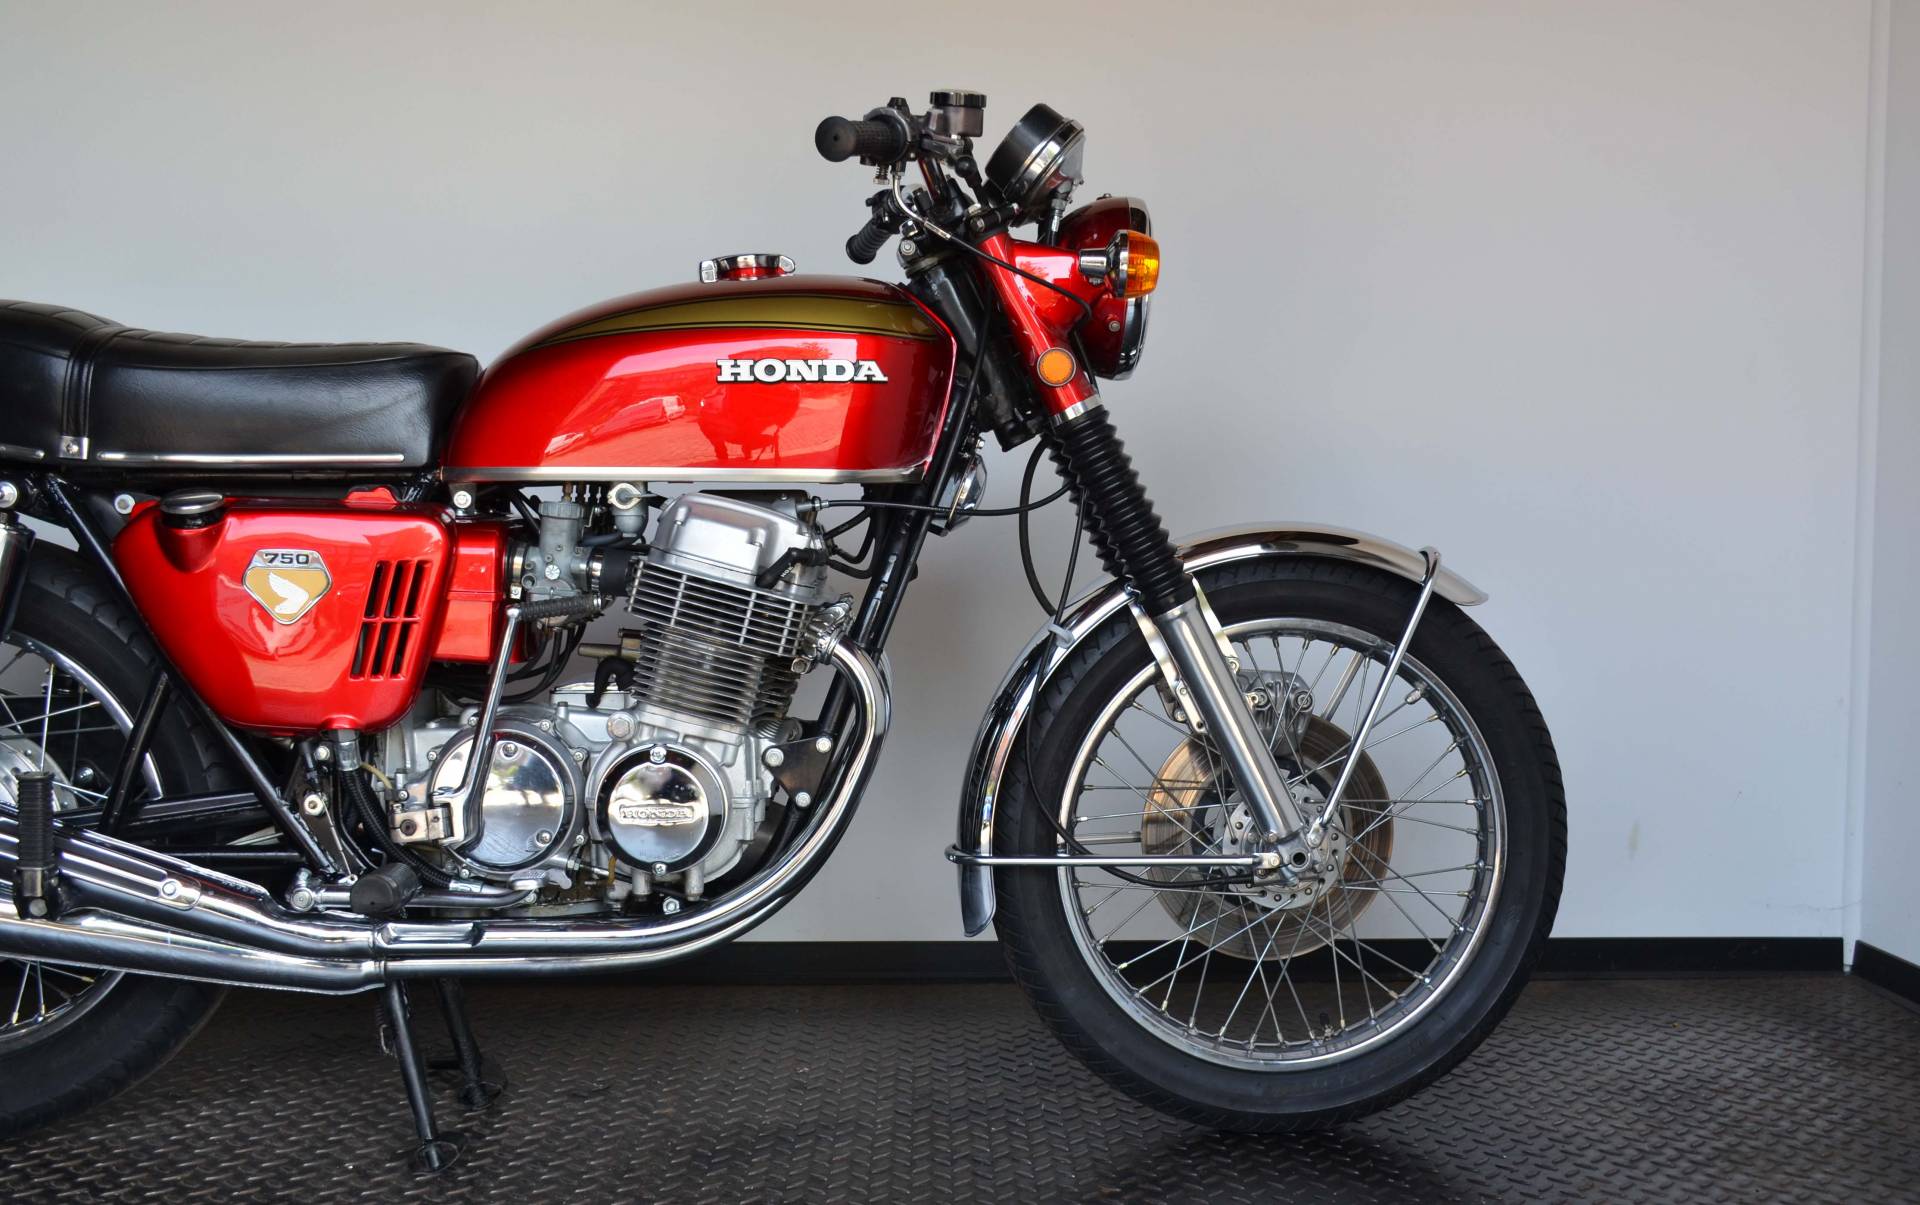 For Sale: Honda CB 750 Four K0 (1969) offered for AUD 23,911